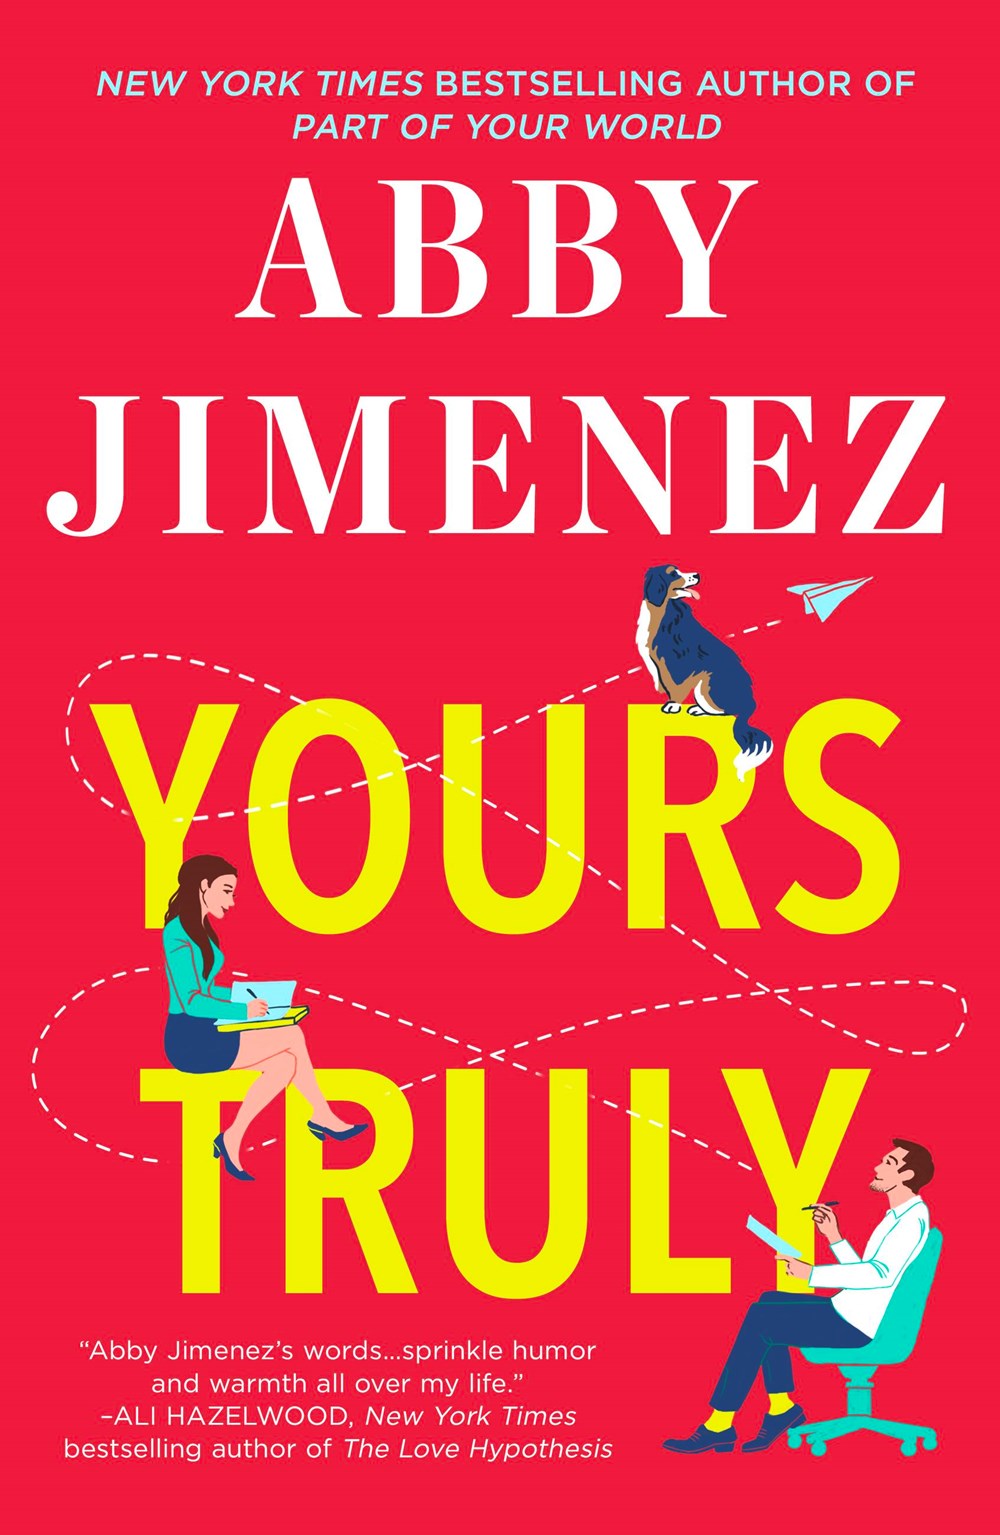 Yours Truly (Part of Your World) by Abby Jimenez